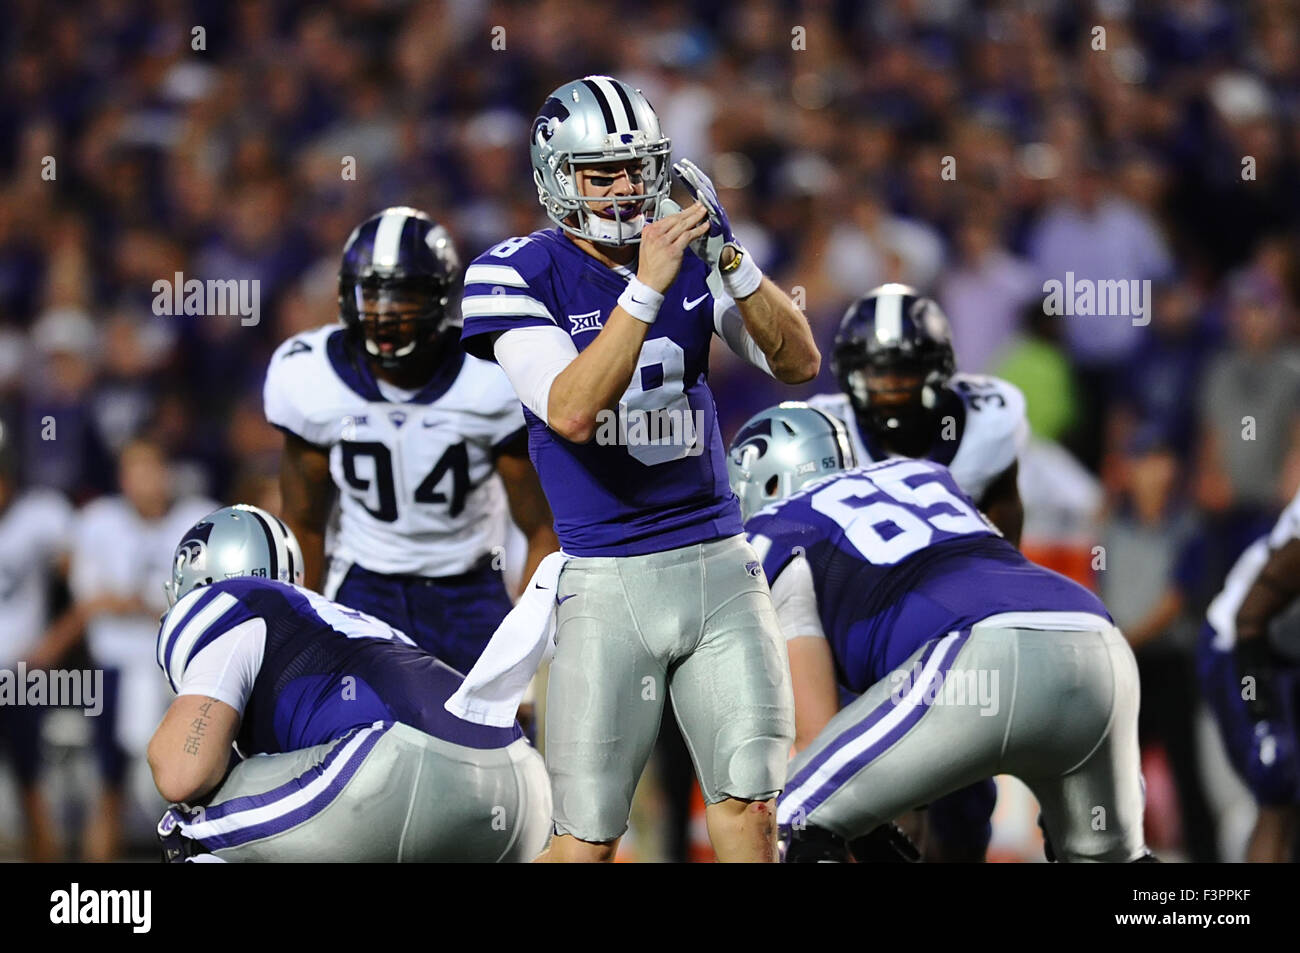 Manhattan, Kansas, USA. 10th Oct, 2015. Kansas State Wildcats quarterback Joe Hubener (8) calls a time out in the first half as the play clock runs down during the NCAA Football game between the TCU Horned Frogs and Kansas State Wildcats at Bill Snyder Family Stadium in Manhattan, Kansas. Kendall Shaw/CSM/Alamy Live News Stock Photo